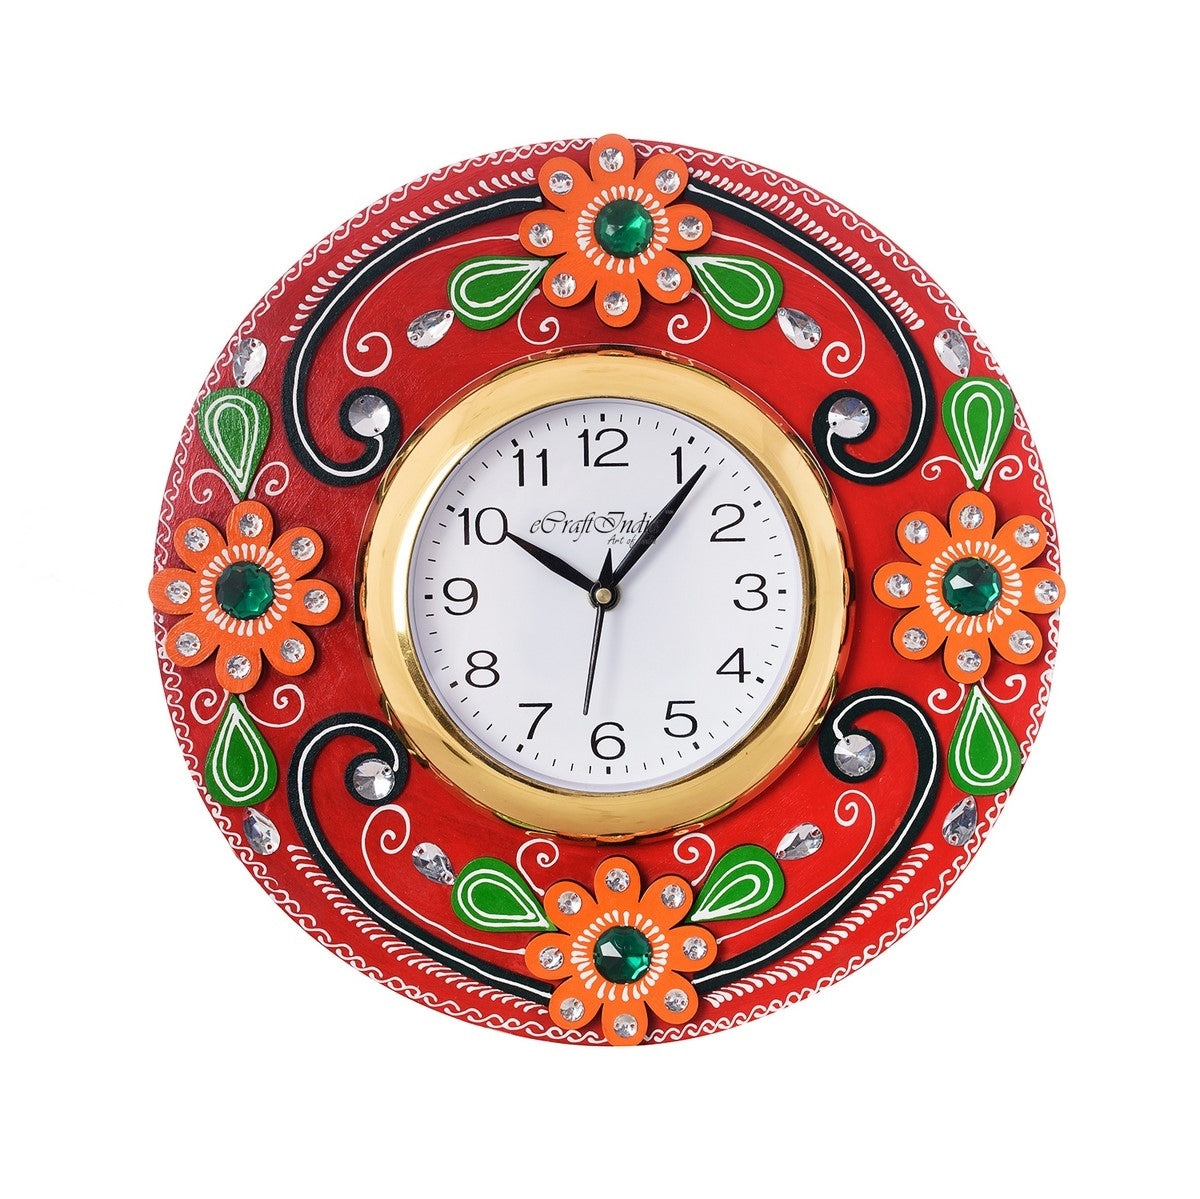 Crystal Studded Floral Papier-Mache Wooden Handcrafted Wall Clock